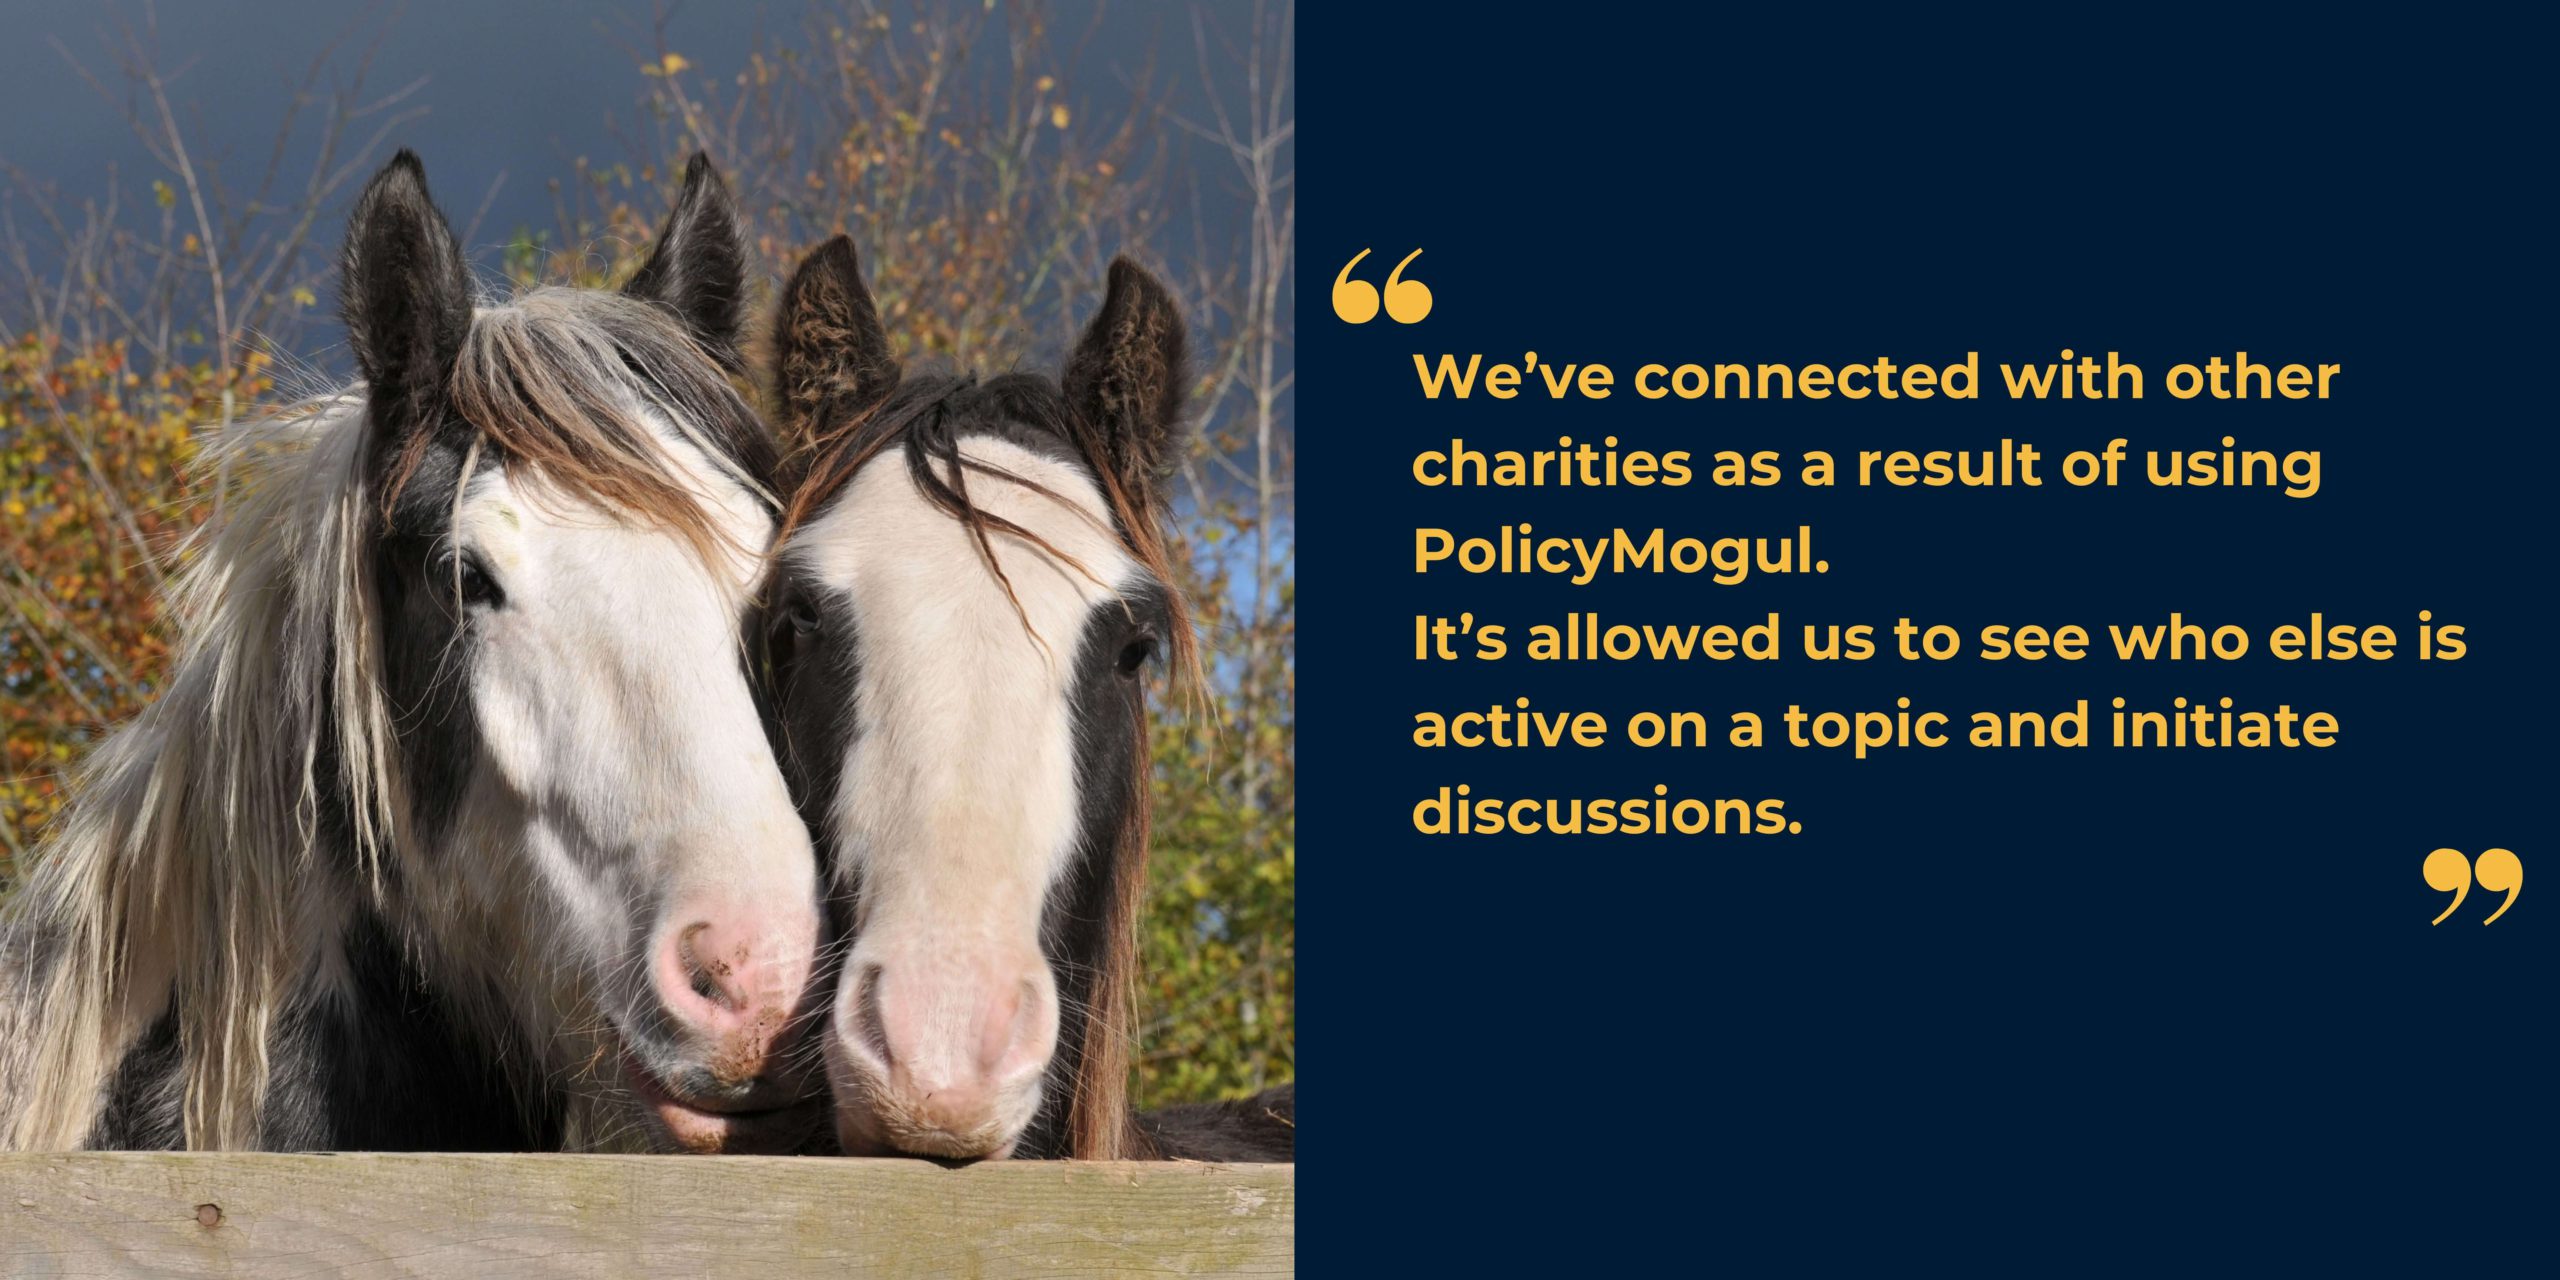 Image of two horses resting their heads on a fence alongside the text "We've connected with other charities as a result of using PolicyMogul. It's allowed us to see who else is active on a topic and initiate discussions."